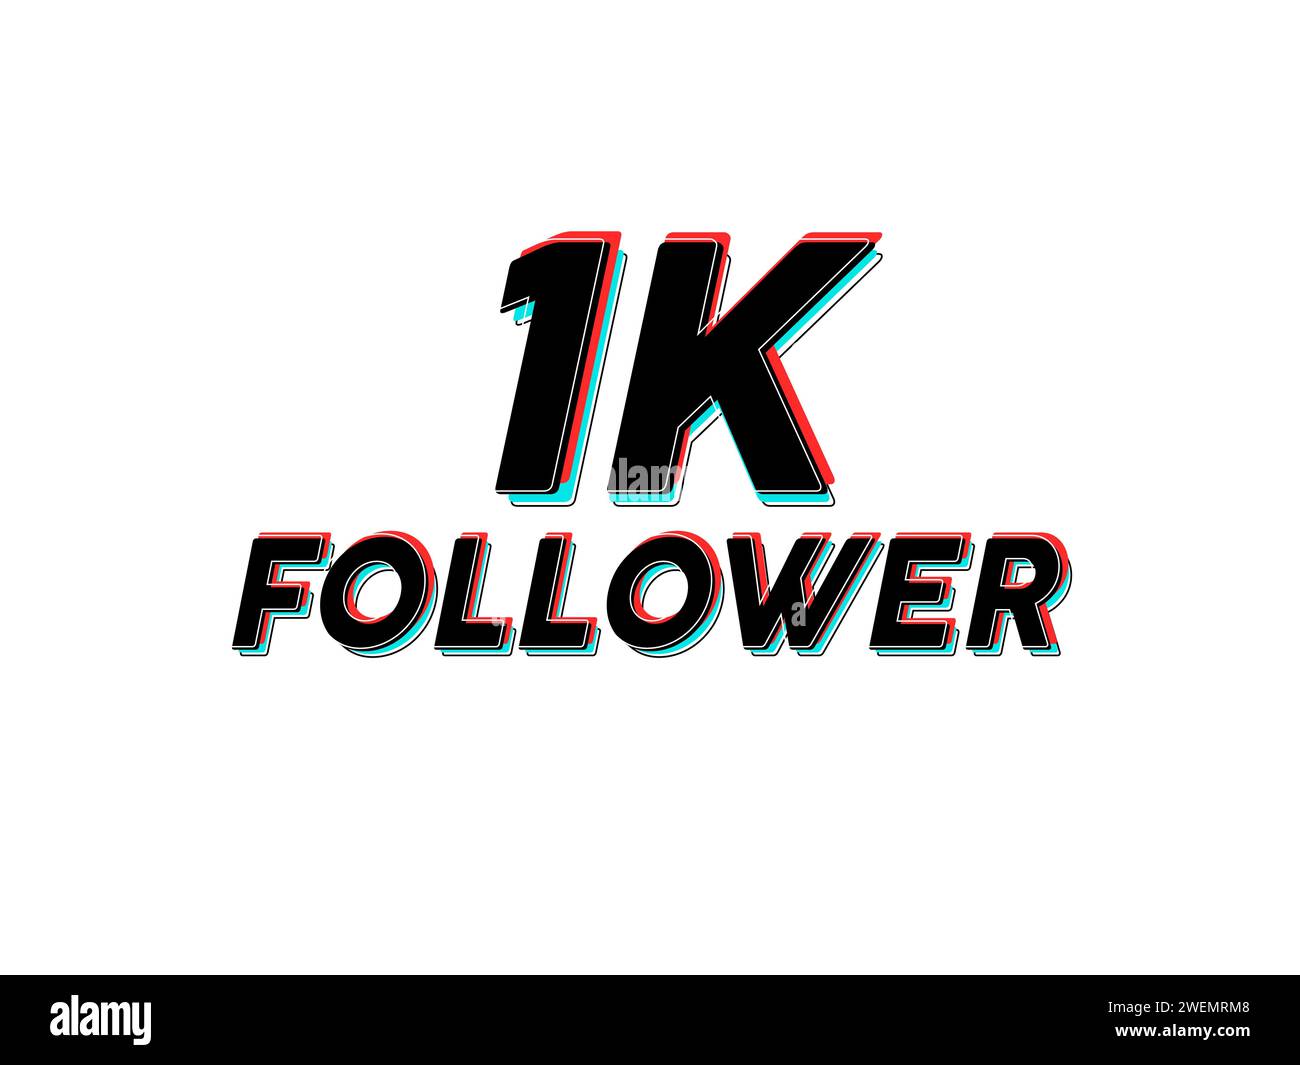 Stylized '1K follower' text with 3D red and blue effect to celebrate a social media milestone Stock Photo